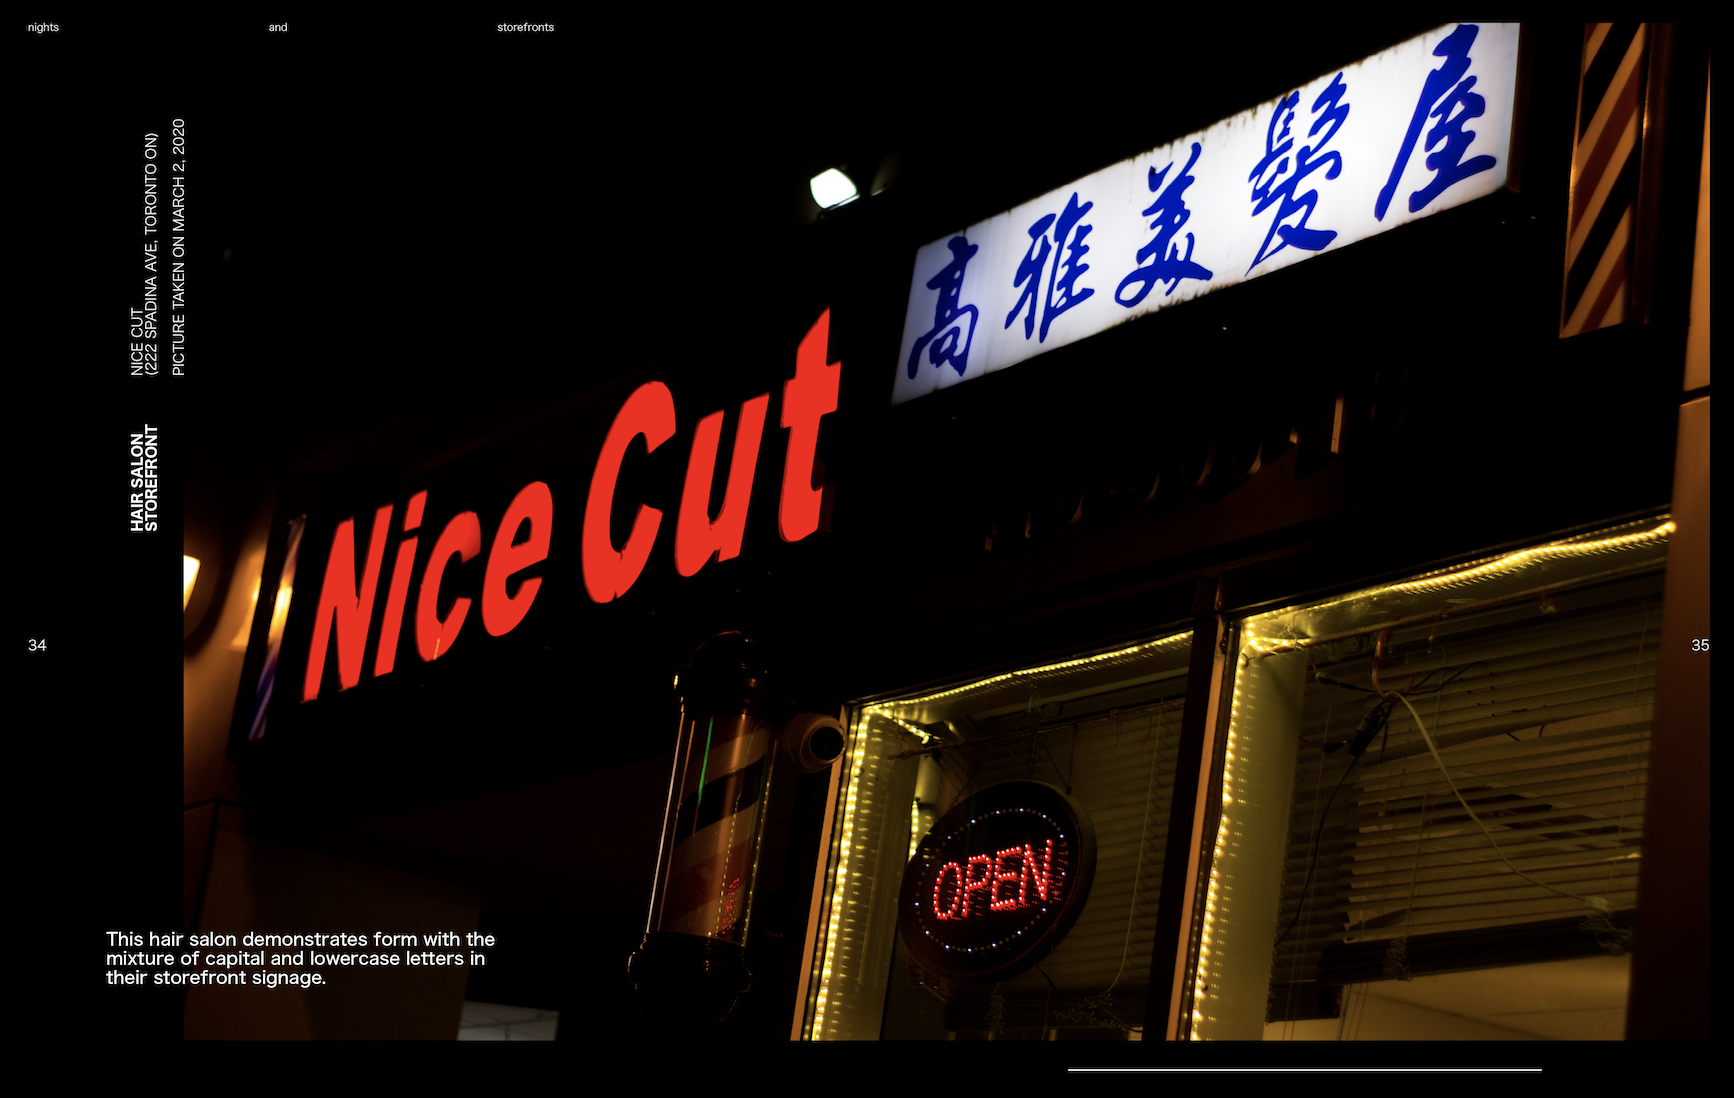 Nights and Storefronts - Environmental Typography